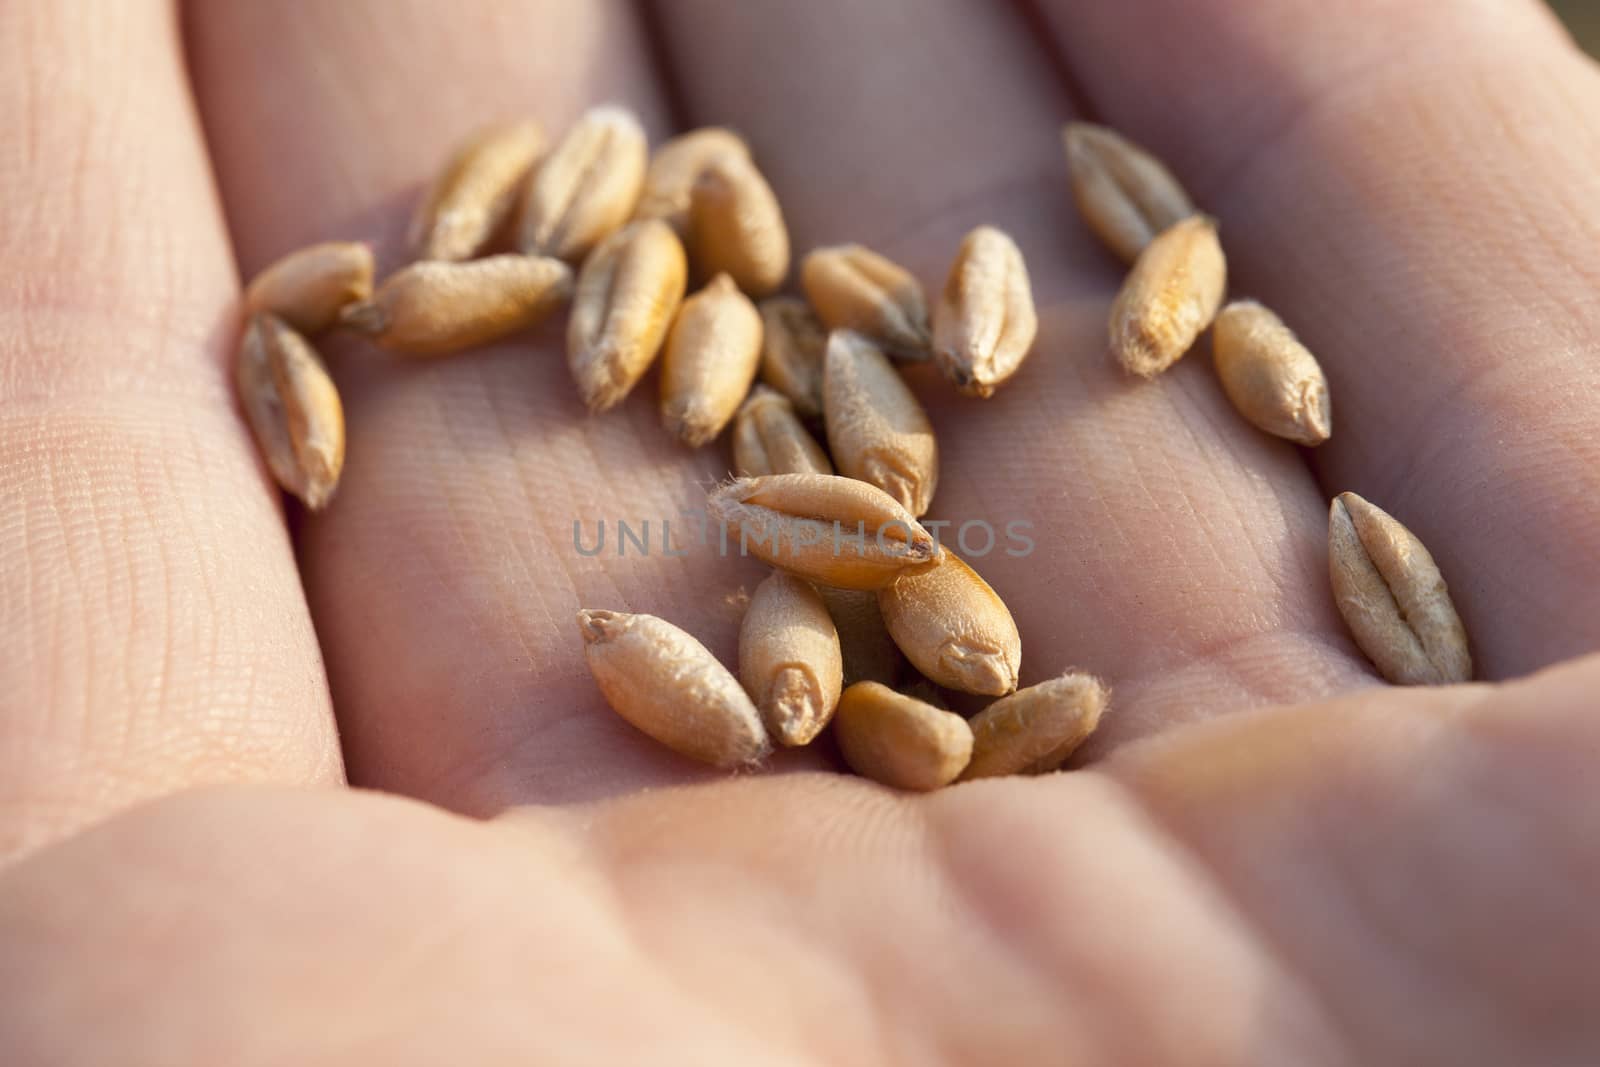  ripe yellow wheat lying in the hand, is photographed close-up